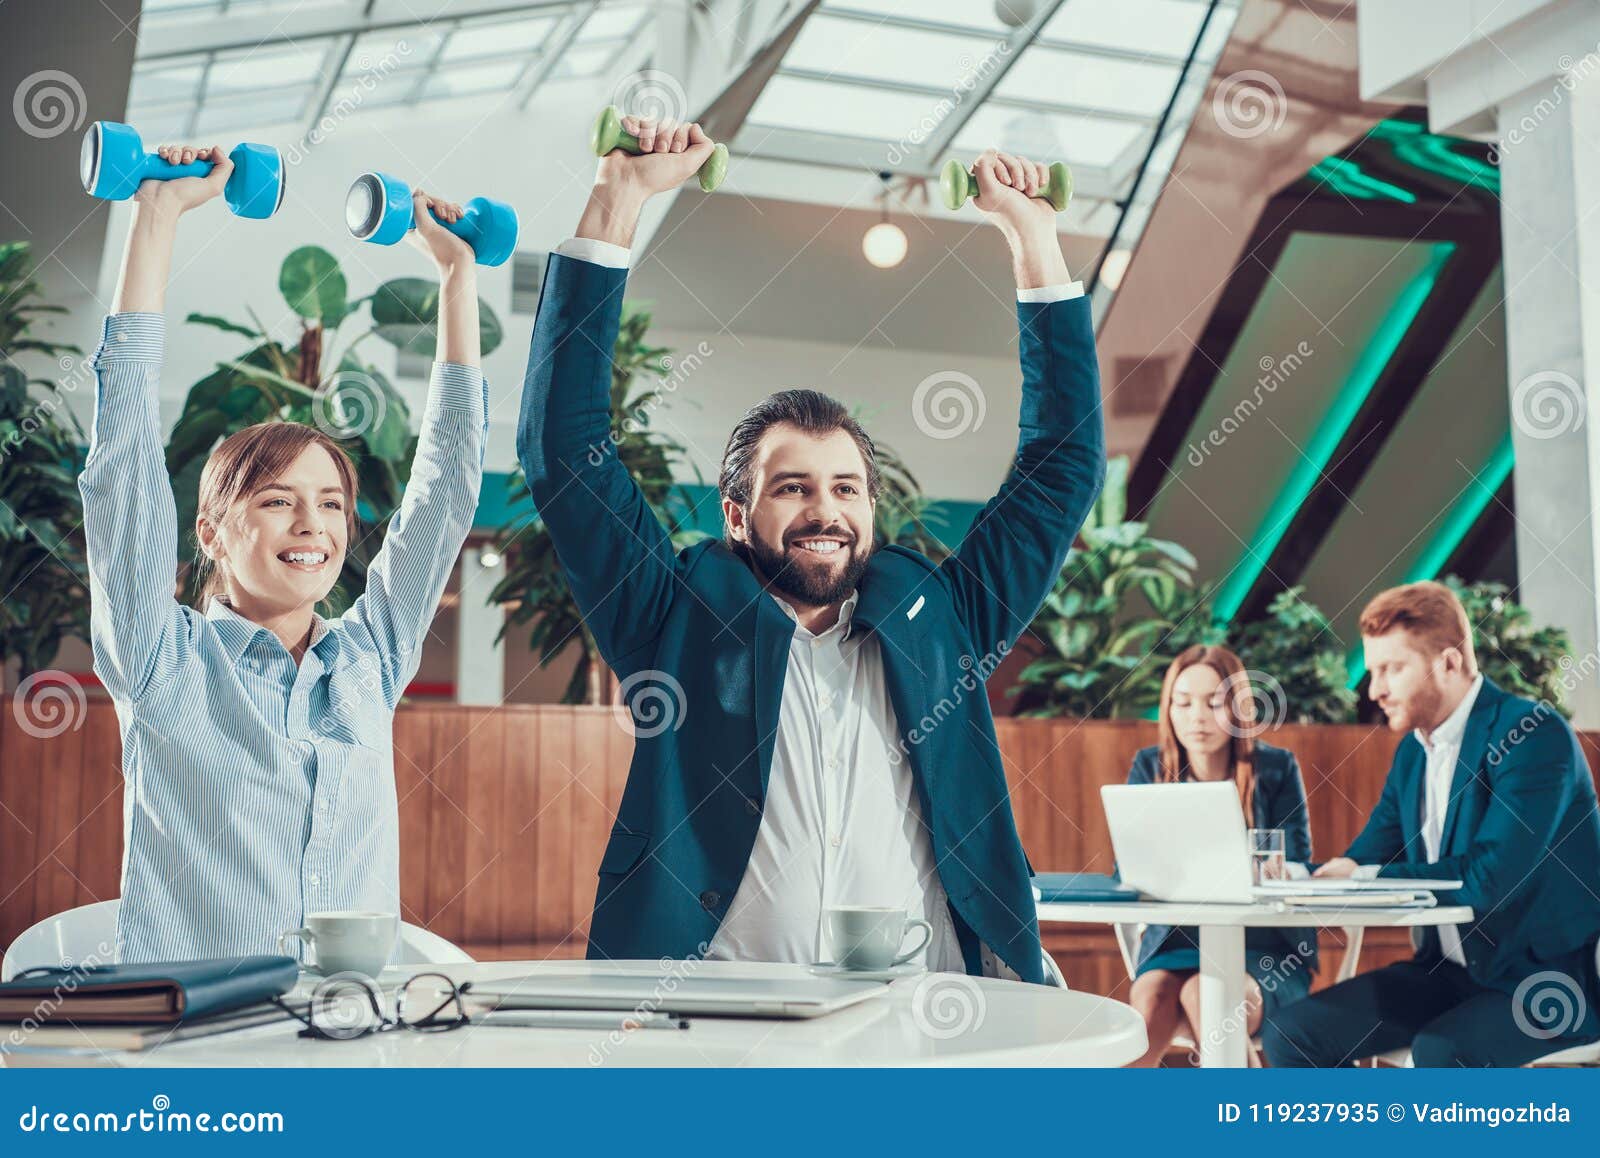 Two Workers Exercising with Dumbbells in Office. Stock Image - Image of ...